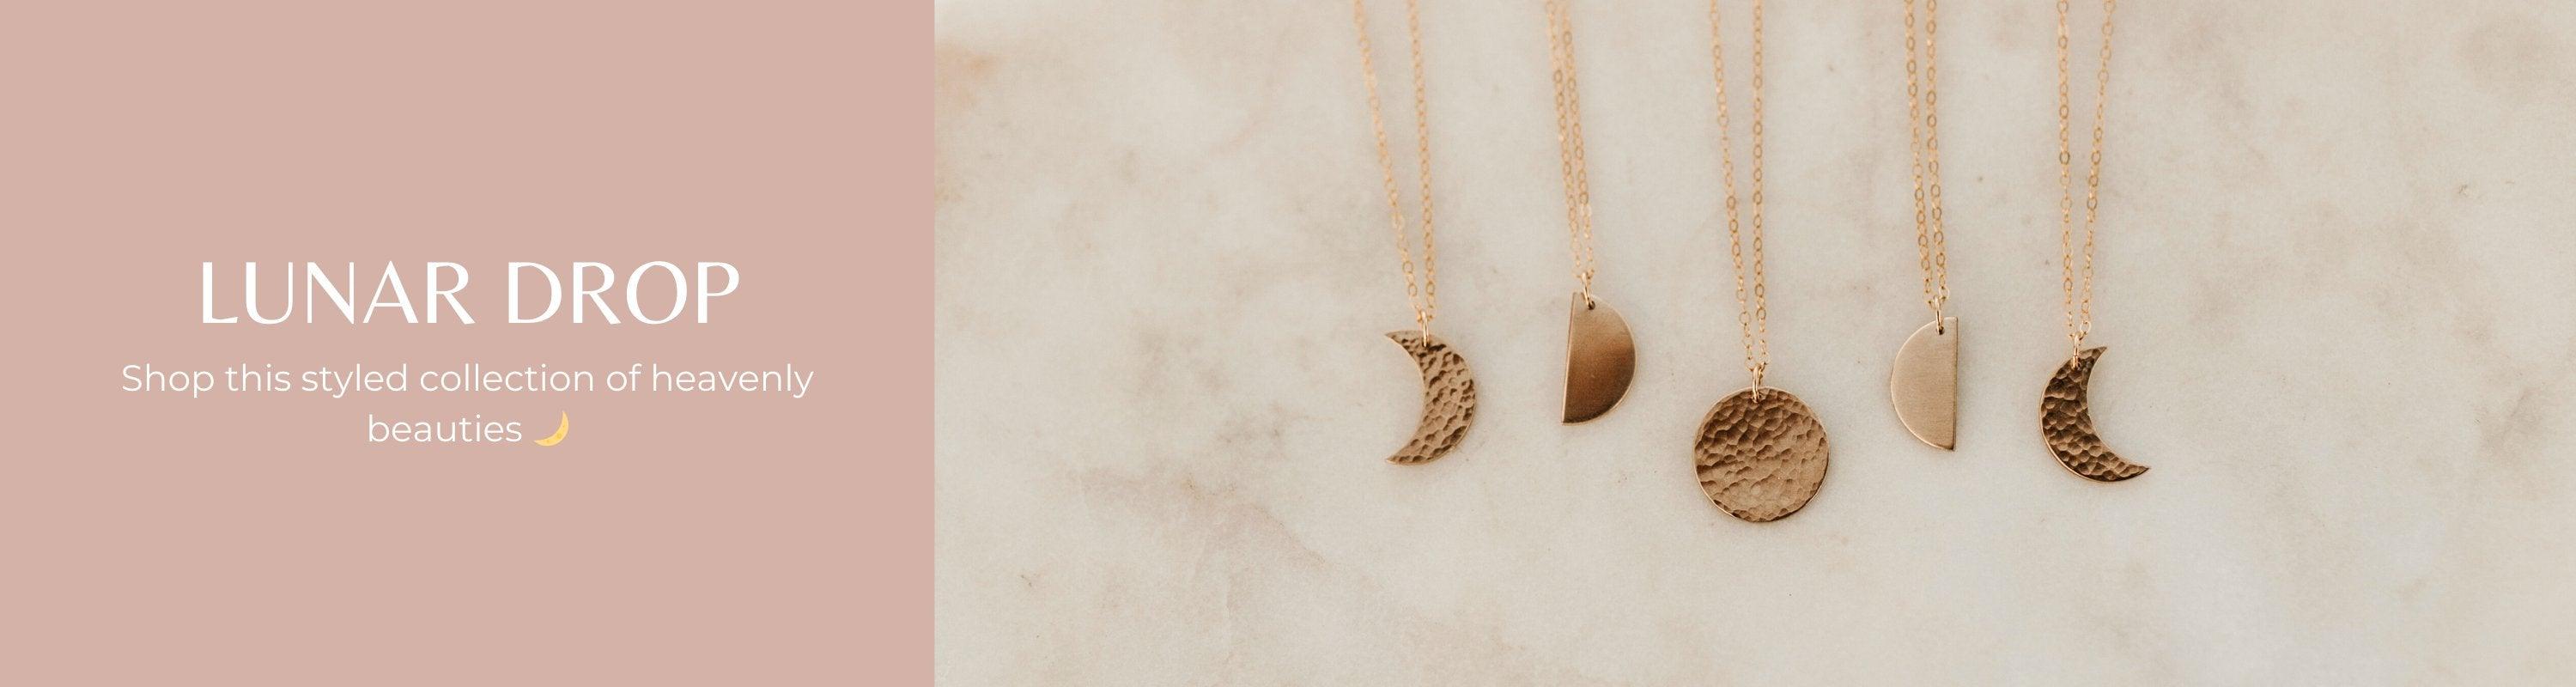 Lunar Collection - Nolia Jewelry - Meaningful + Sustainably Handcrafted Jewelry